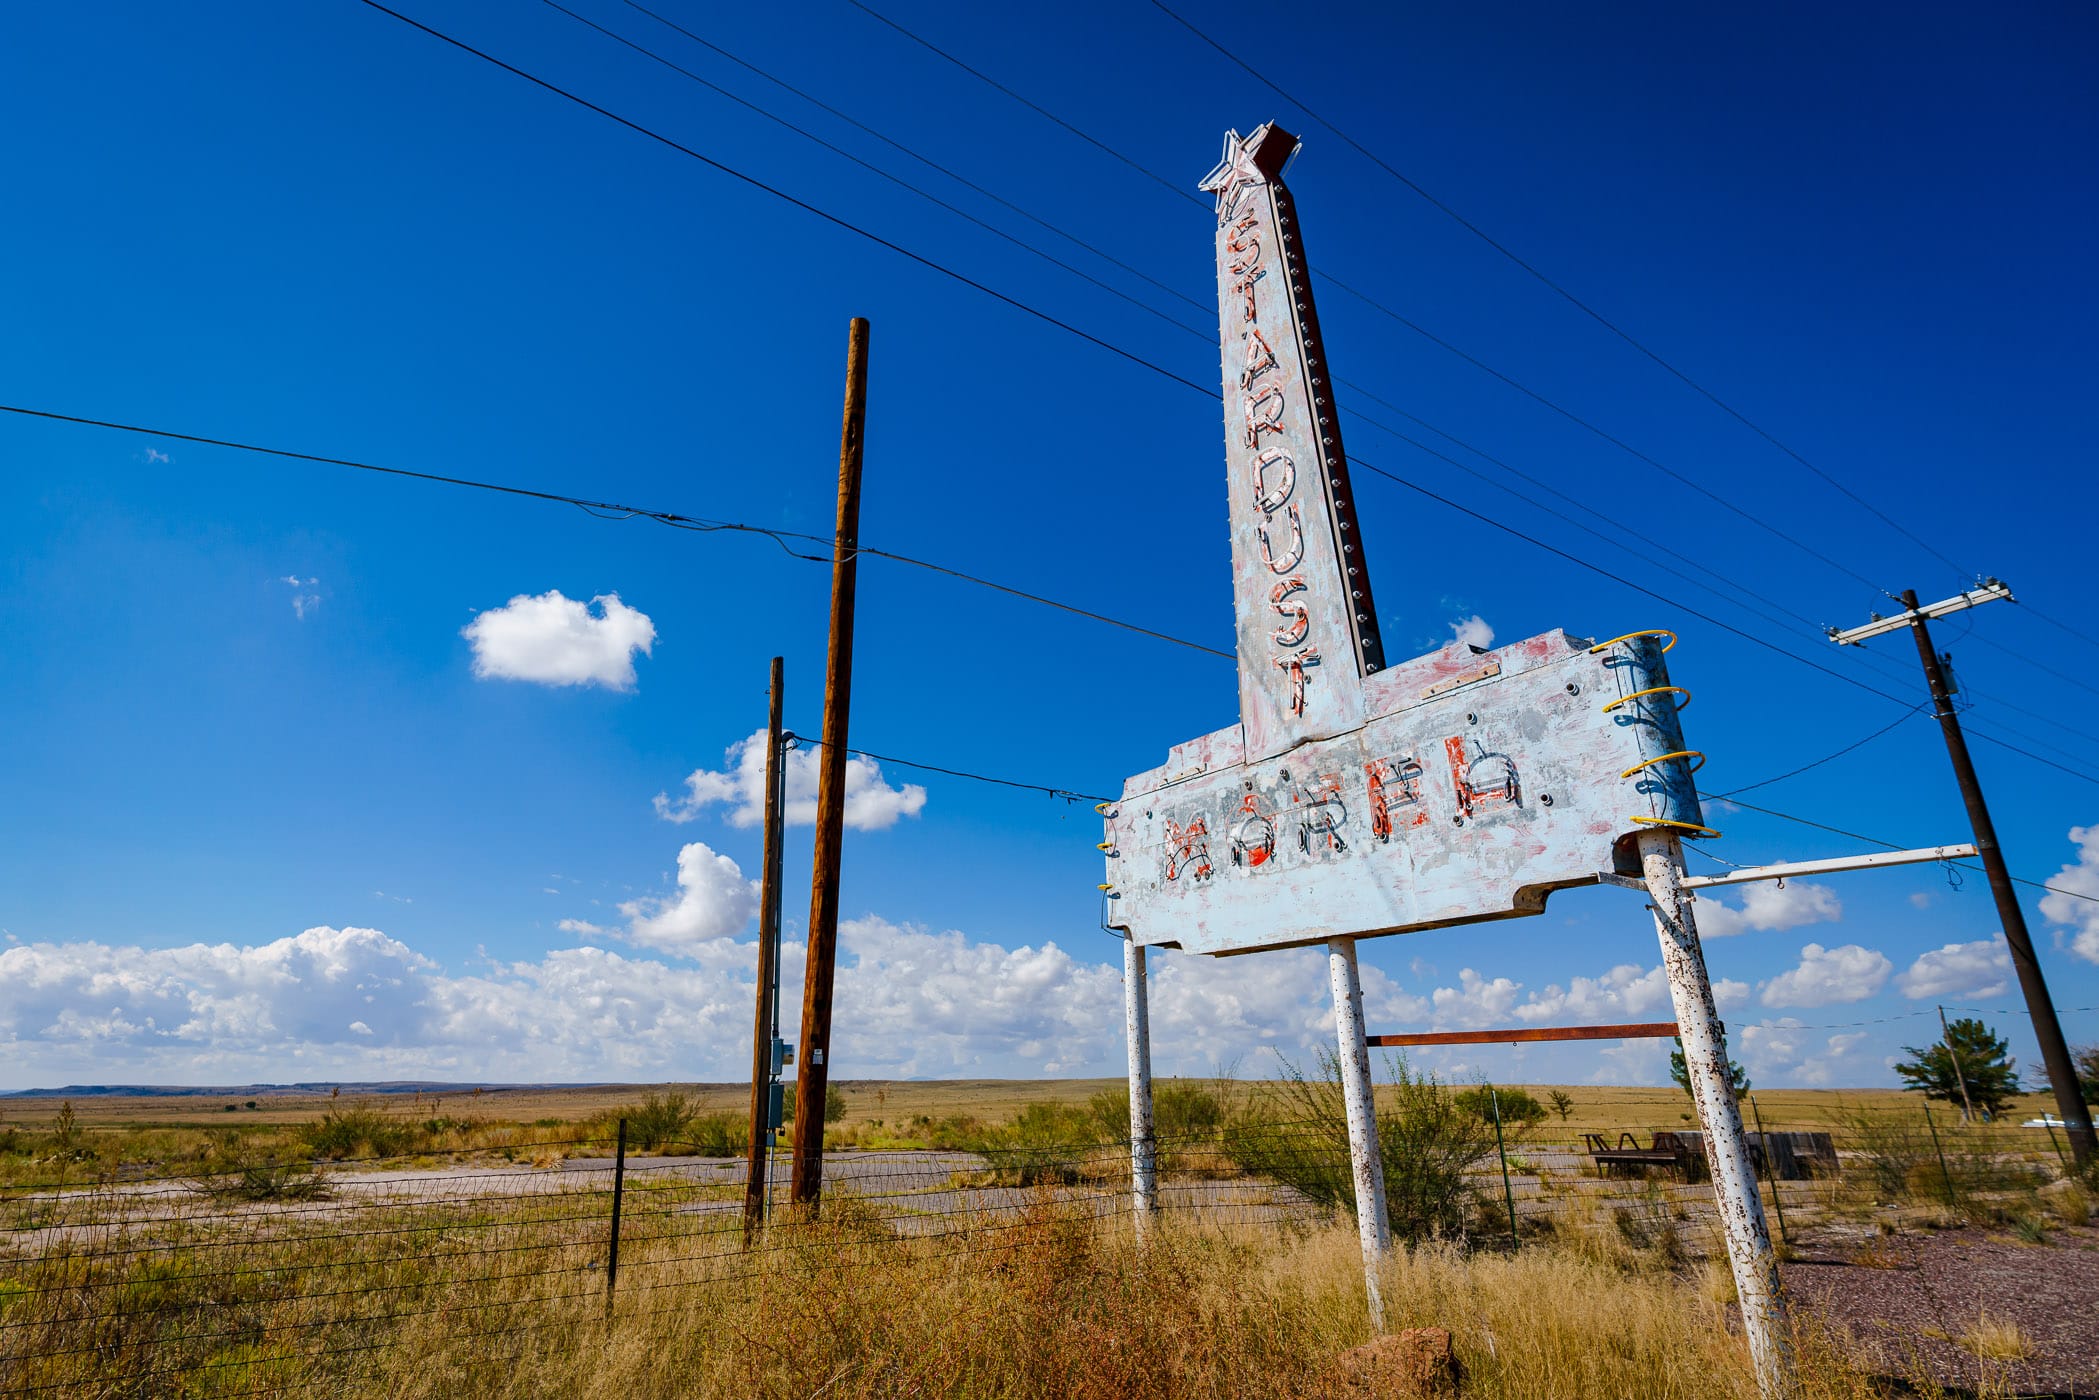 The abandoned, decaying sign of the long-demolished Stardust Motel in Marfa, Texas.